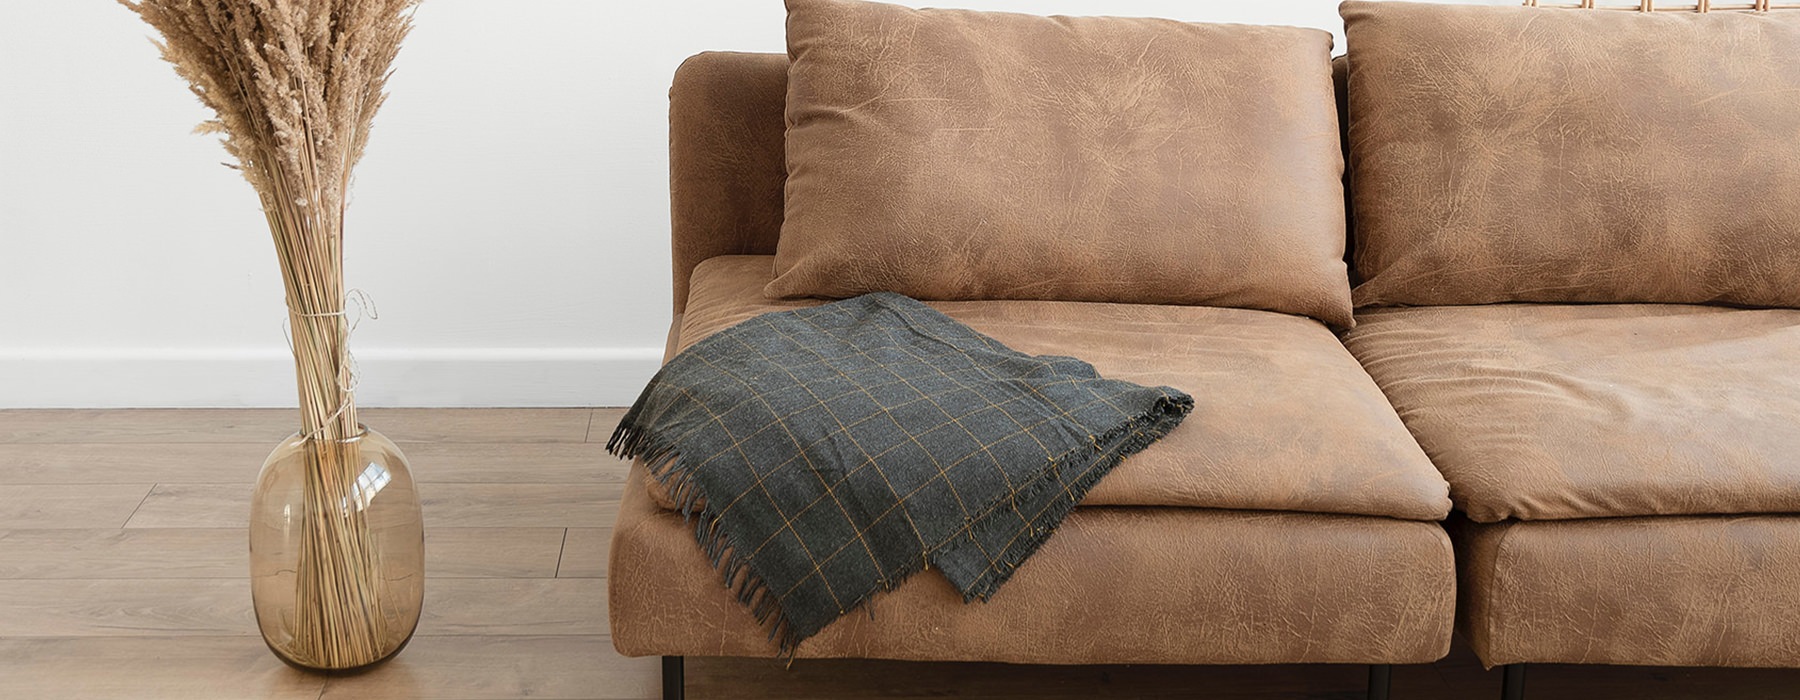 couch with vase and throw blanket